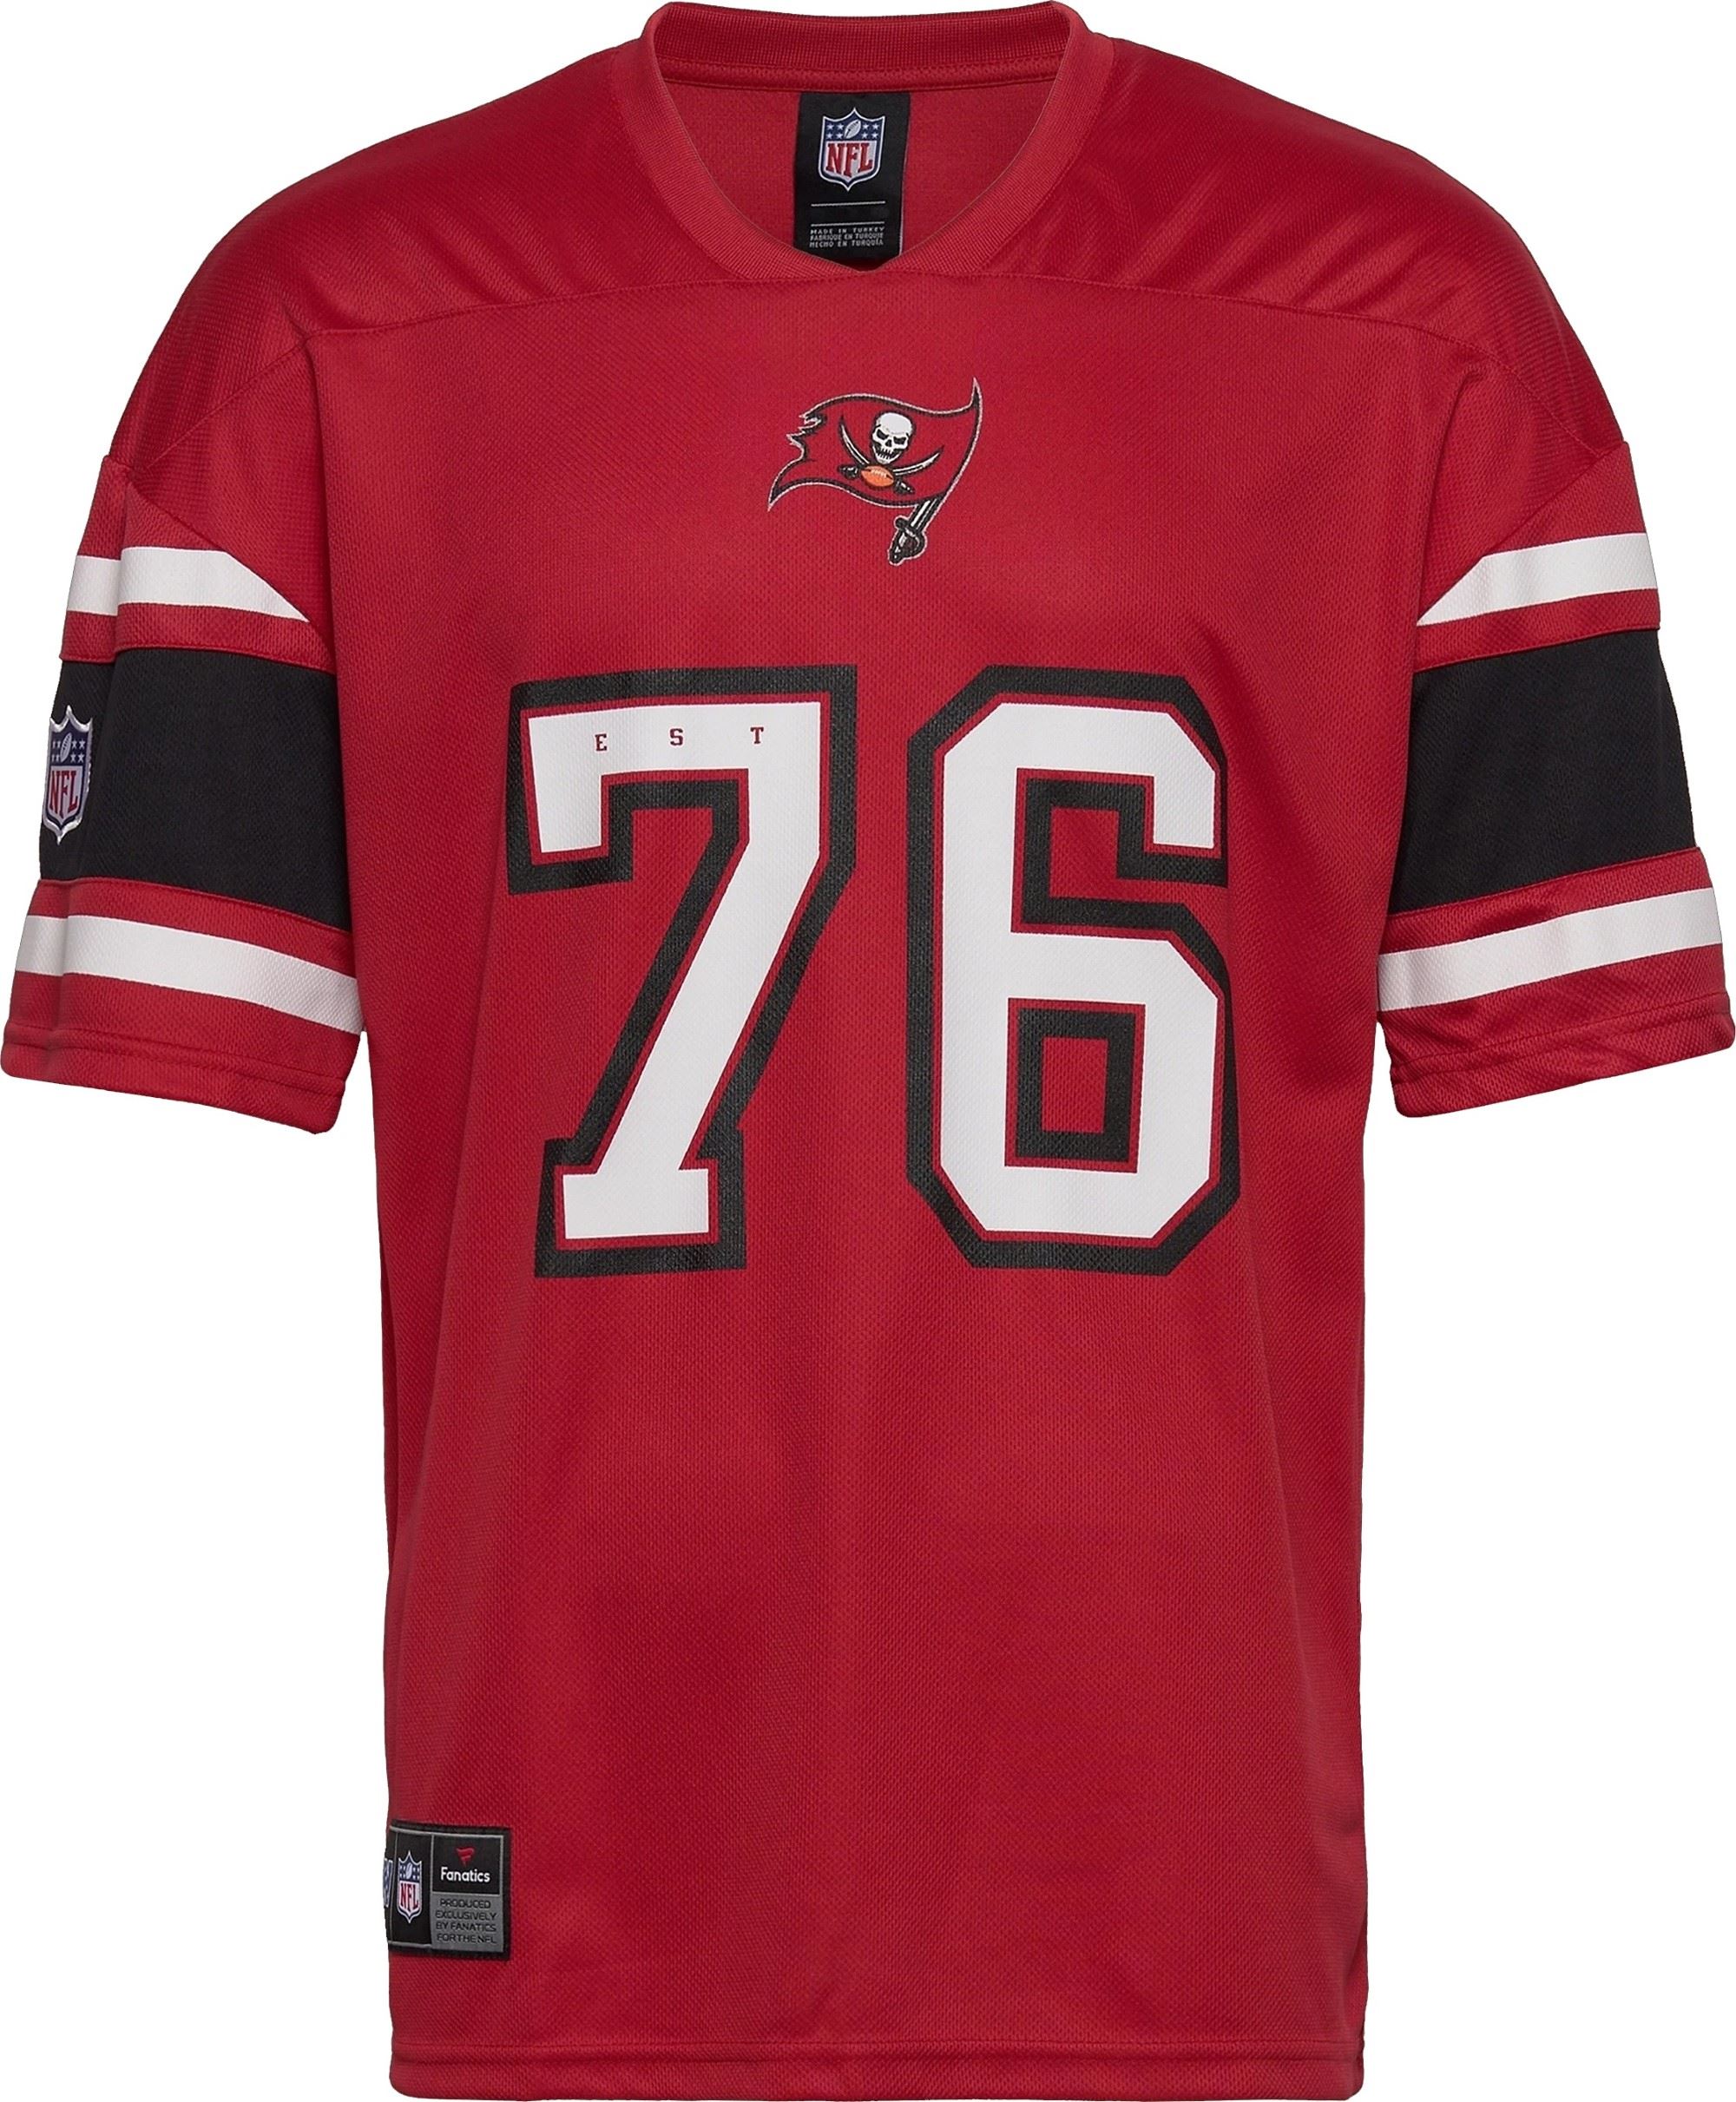 Tampa Bay Buccaneers NFL Team Value Franchise Poly Mesh Supporters Jersey Fanatics